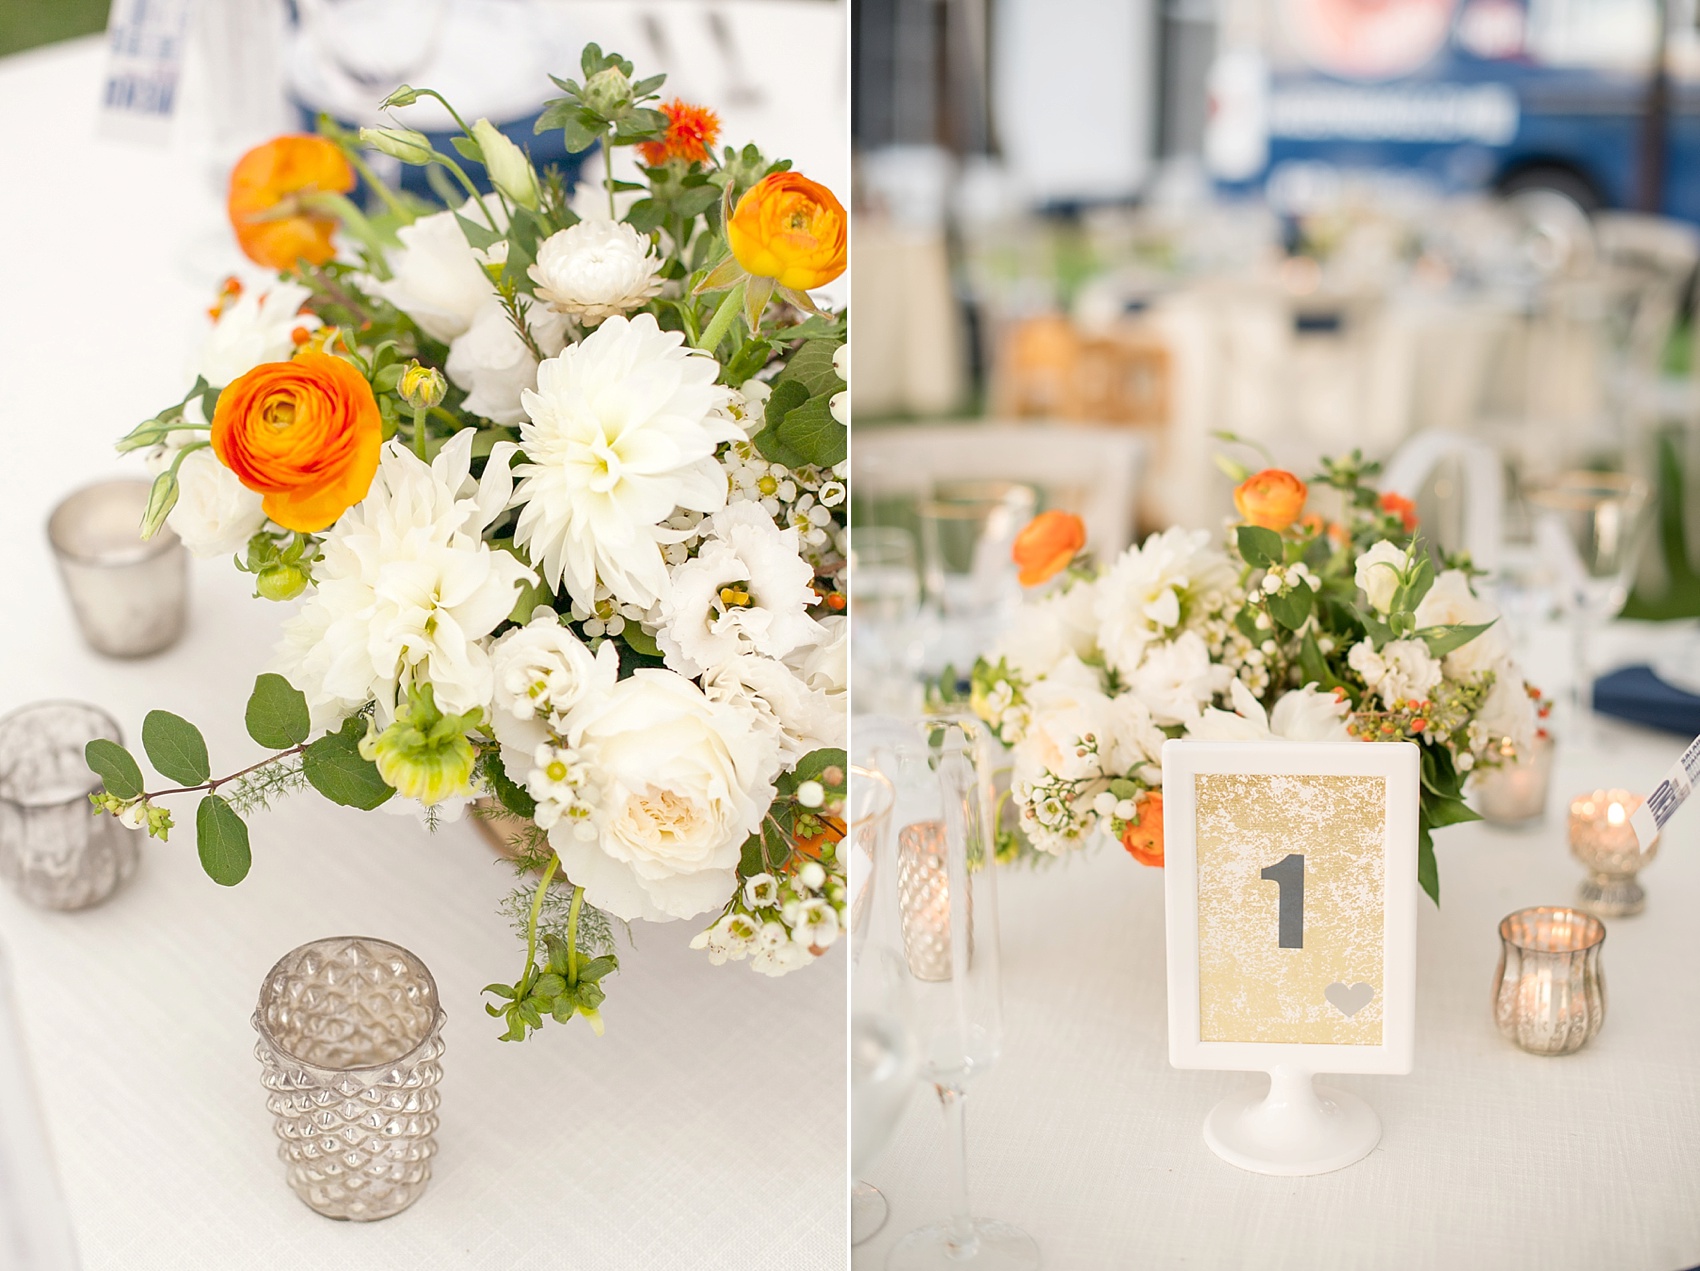 NY wedding at Southwood Estate. Images by Mikkel Paige Photography, NYC wedding photographer. Tented lake front reception with blue linens and vintage plates, and orange and blue flowers by Sachi Rose.